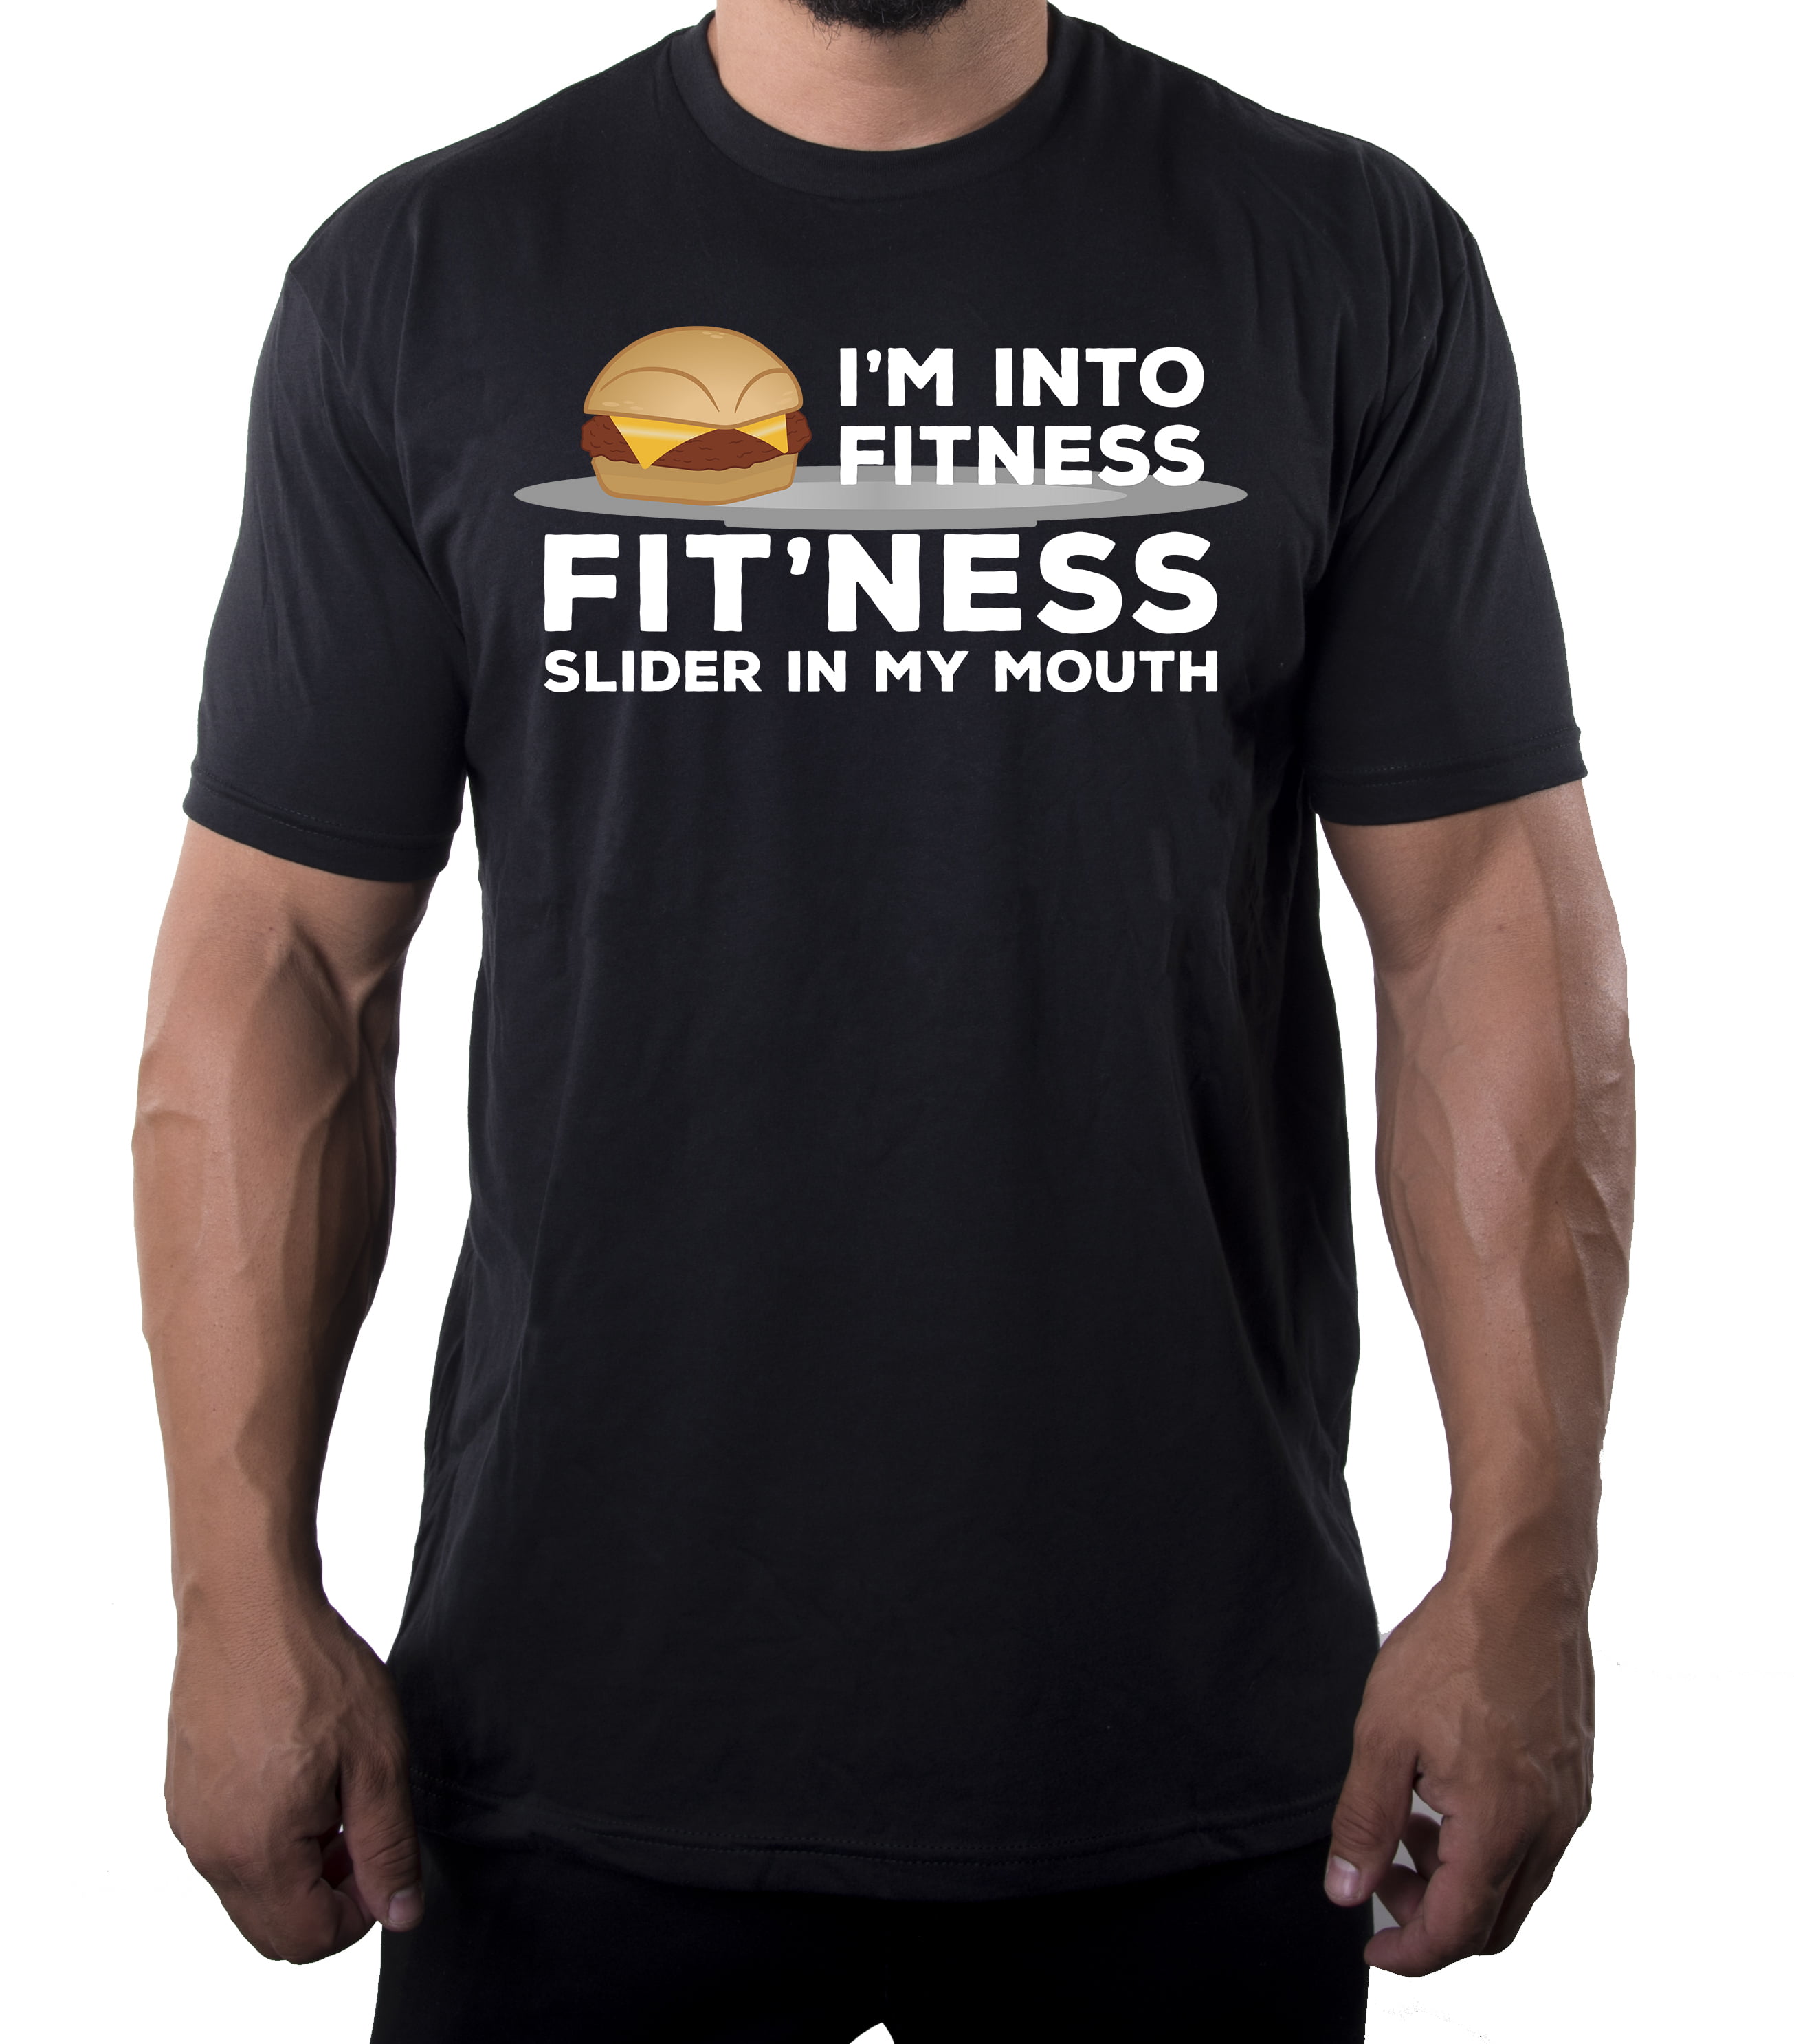 Men's Funny Fitness Slider T-shirts, Funny Graphic T-shirts, Gym T-shirts -  Black MH200FOOD S3 S 